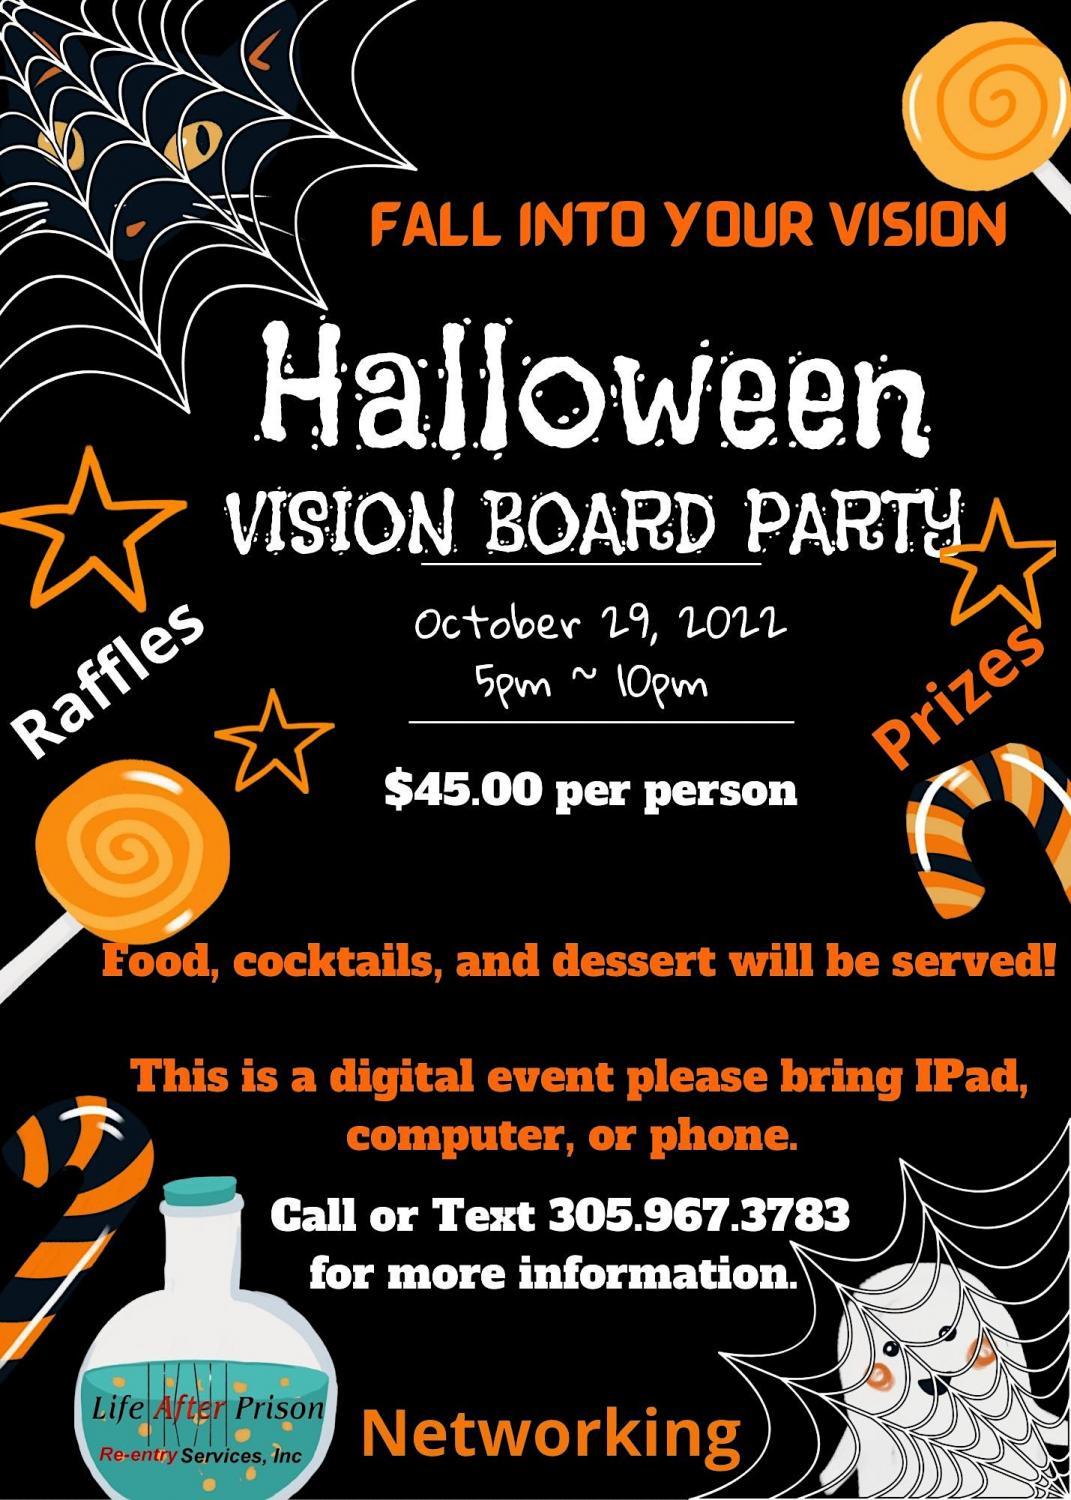 Fall into your VISION Halloween Party
Sat Oct 29, 7:00 PM - Sat Oct 29, 7:00 PM
in 9 days